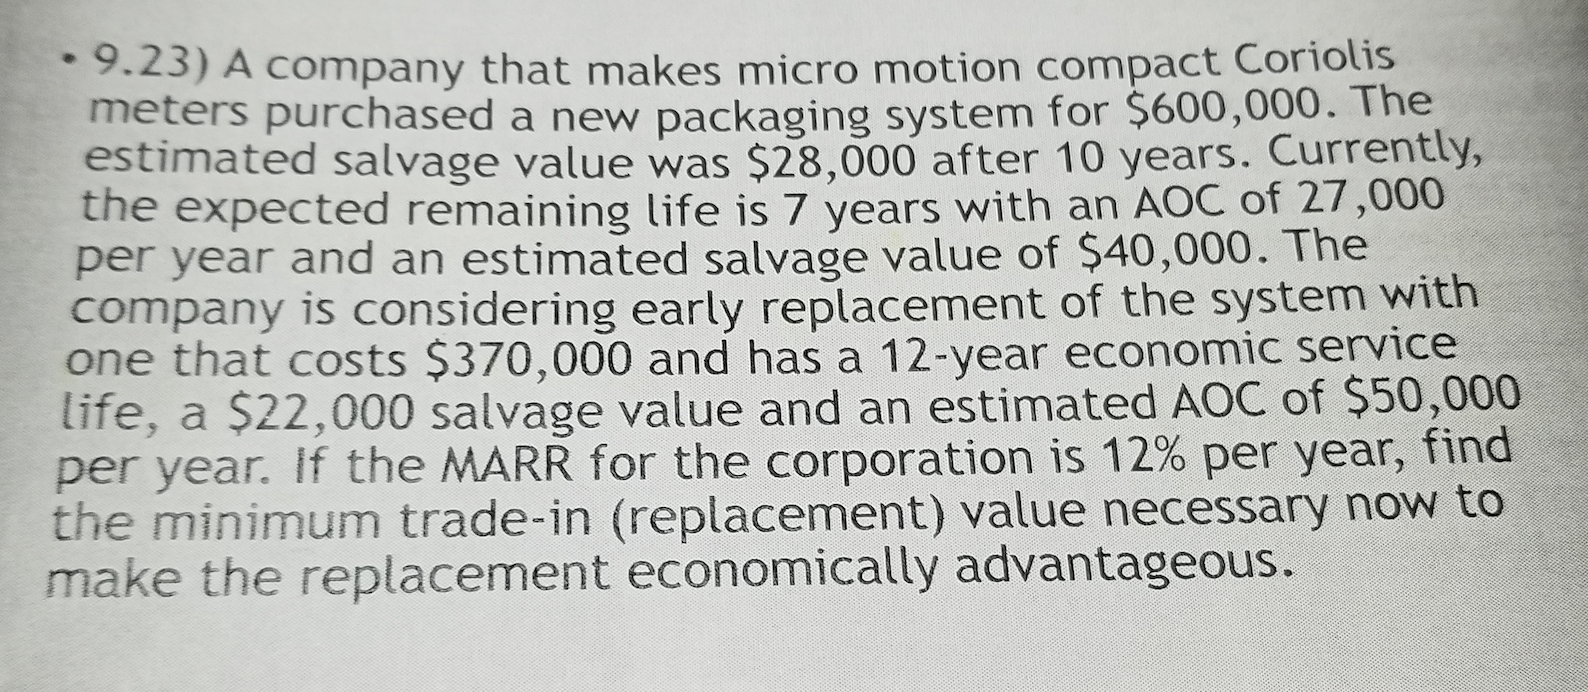 • 9.23) A company that makes micro motion compact Coriolis
meters purchased a new packaging system for $600,000. The
estimated salvage value was $28,000 after 10 years. Currently,
the expected remaining life is 7 years with an AOC of 27,000
per year and an estimated salvage value of $40,000. The
company is considering early replacement of the system with
one that costs $370,000 and has a 12-year economic service
life, a $22,000 salvage value and an estimated AOC of $50,000
per year. If the MARR for the corporation is 12% per year, find
the minimum trade-in (replacement) value necessary now to
make the replacement economically advantageous.
